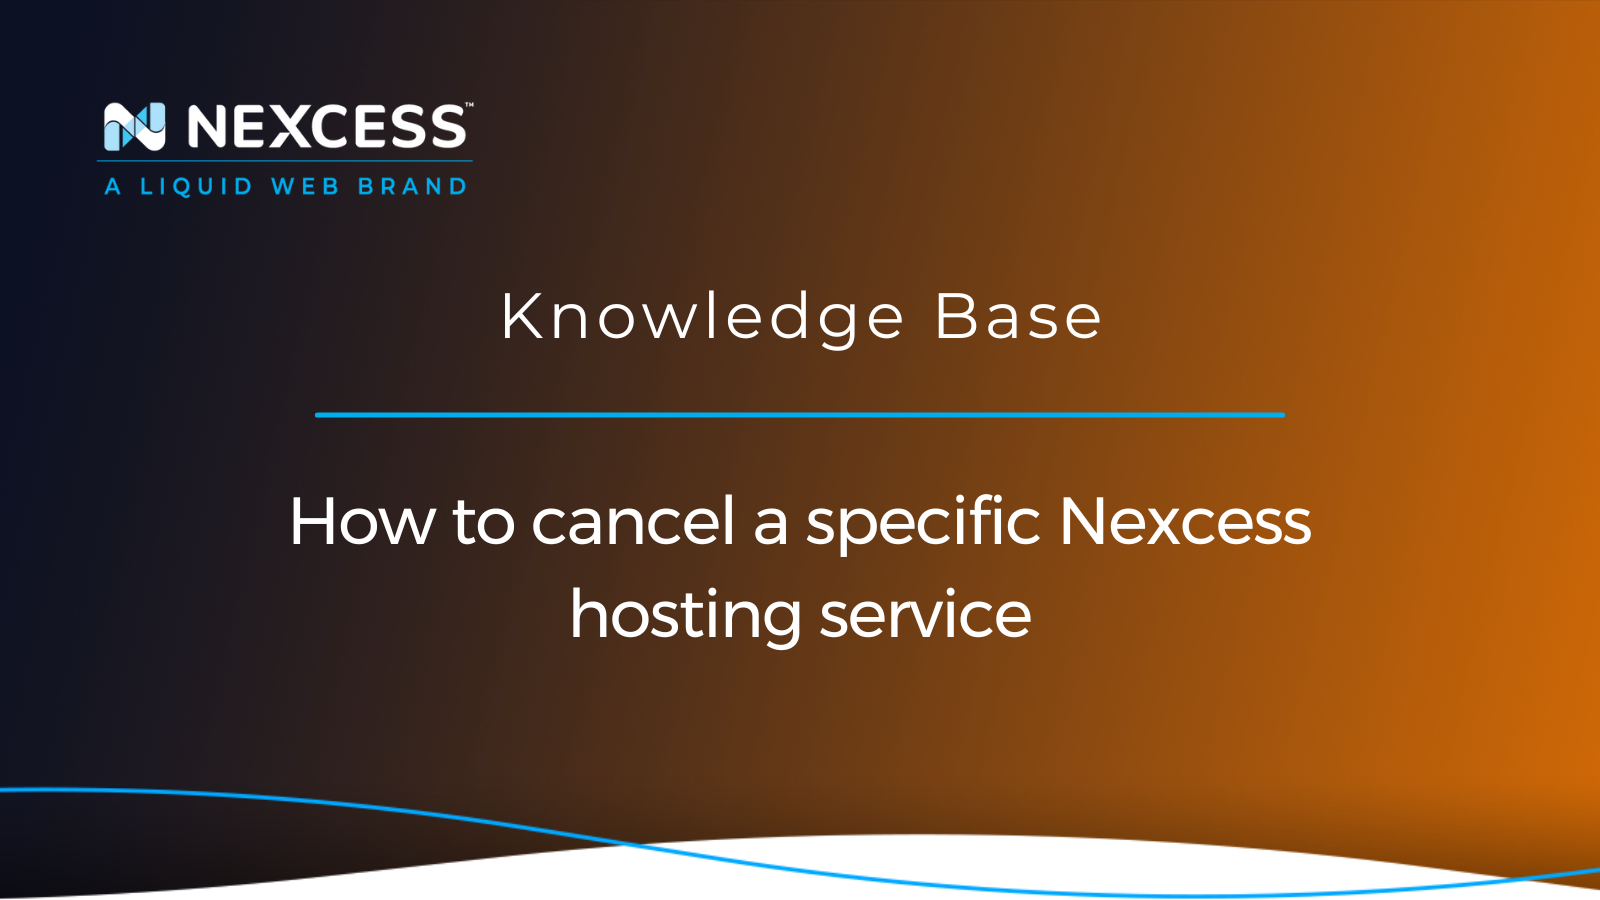 How to cancel a specific Nexcess hosting service